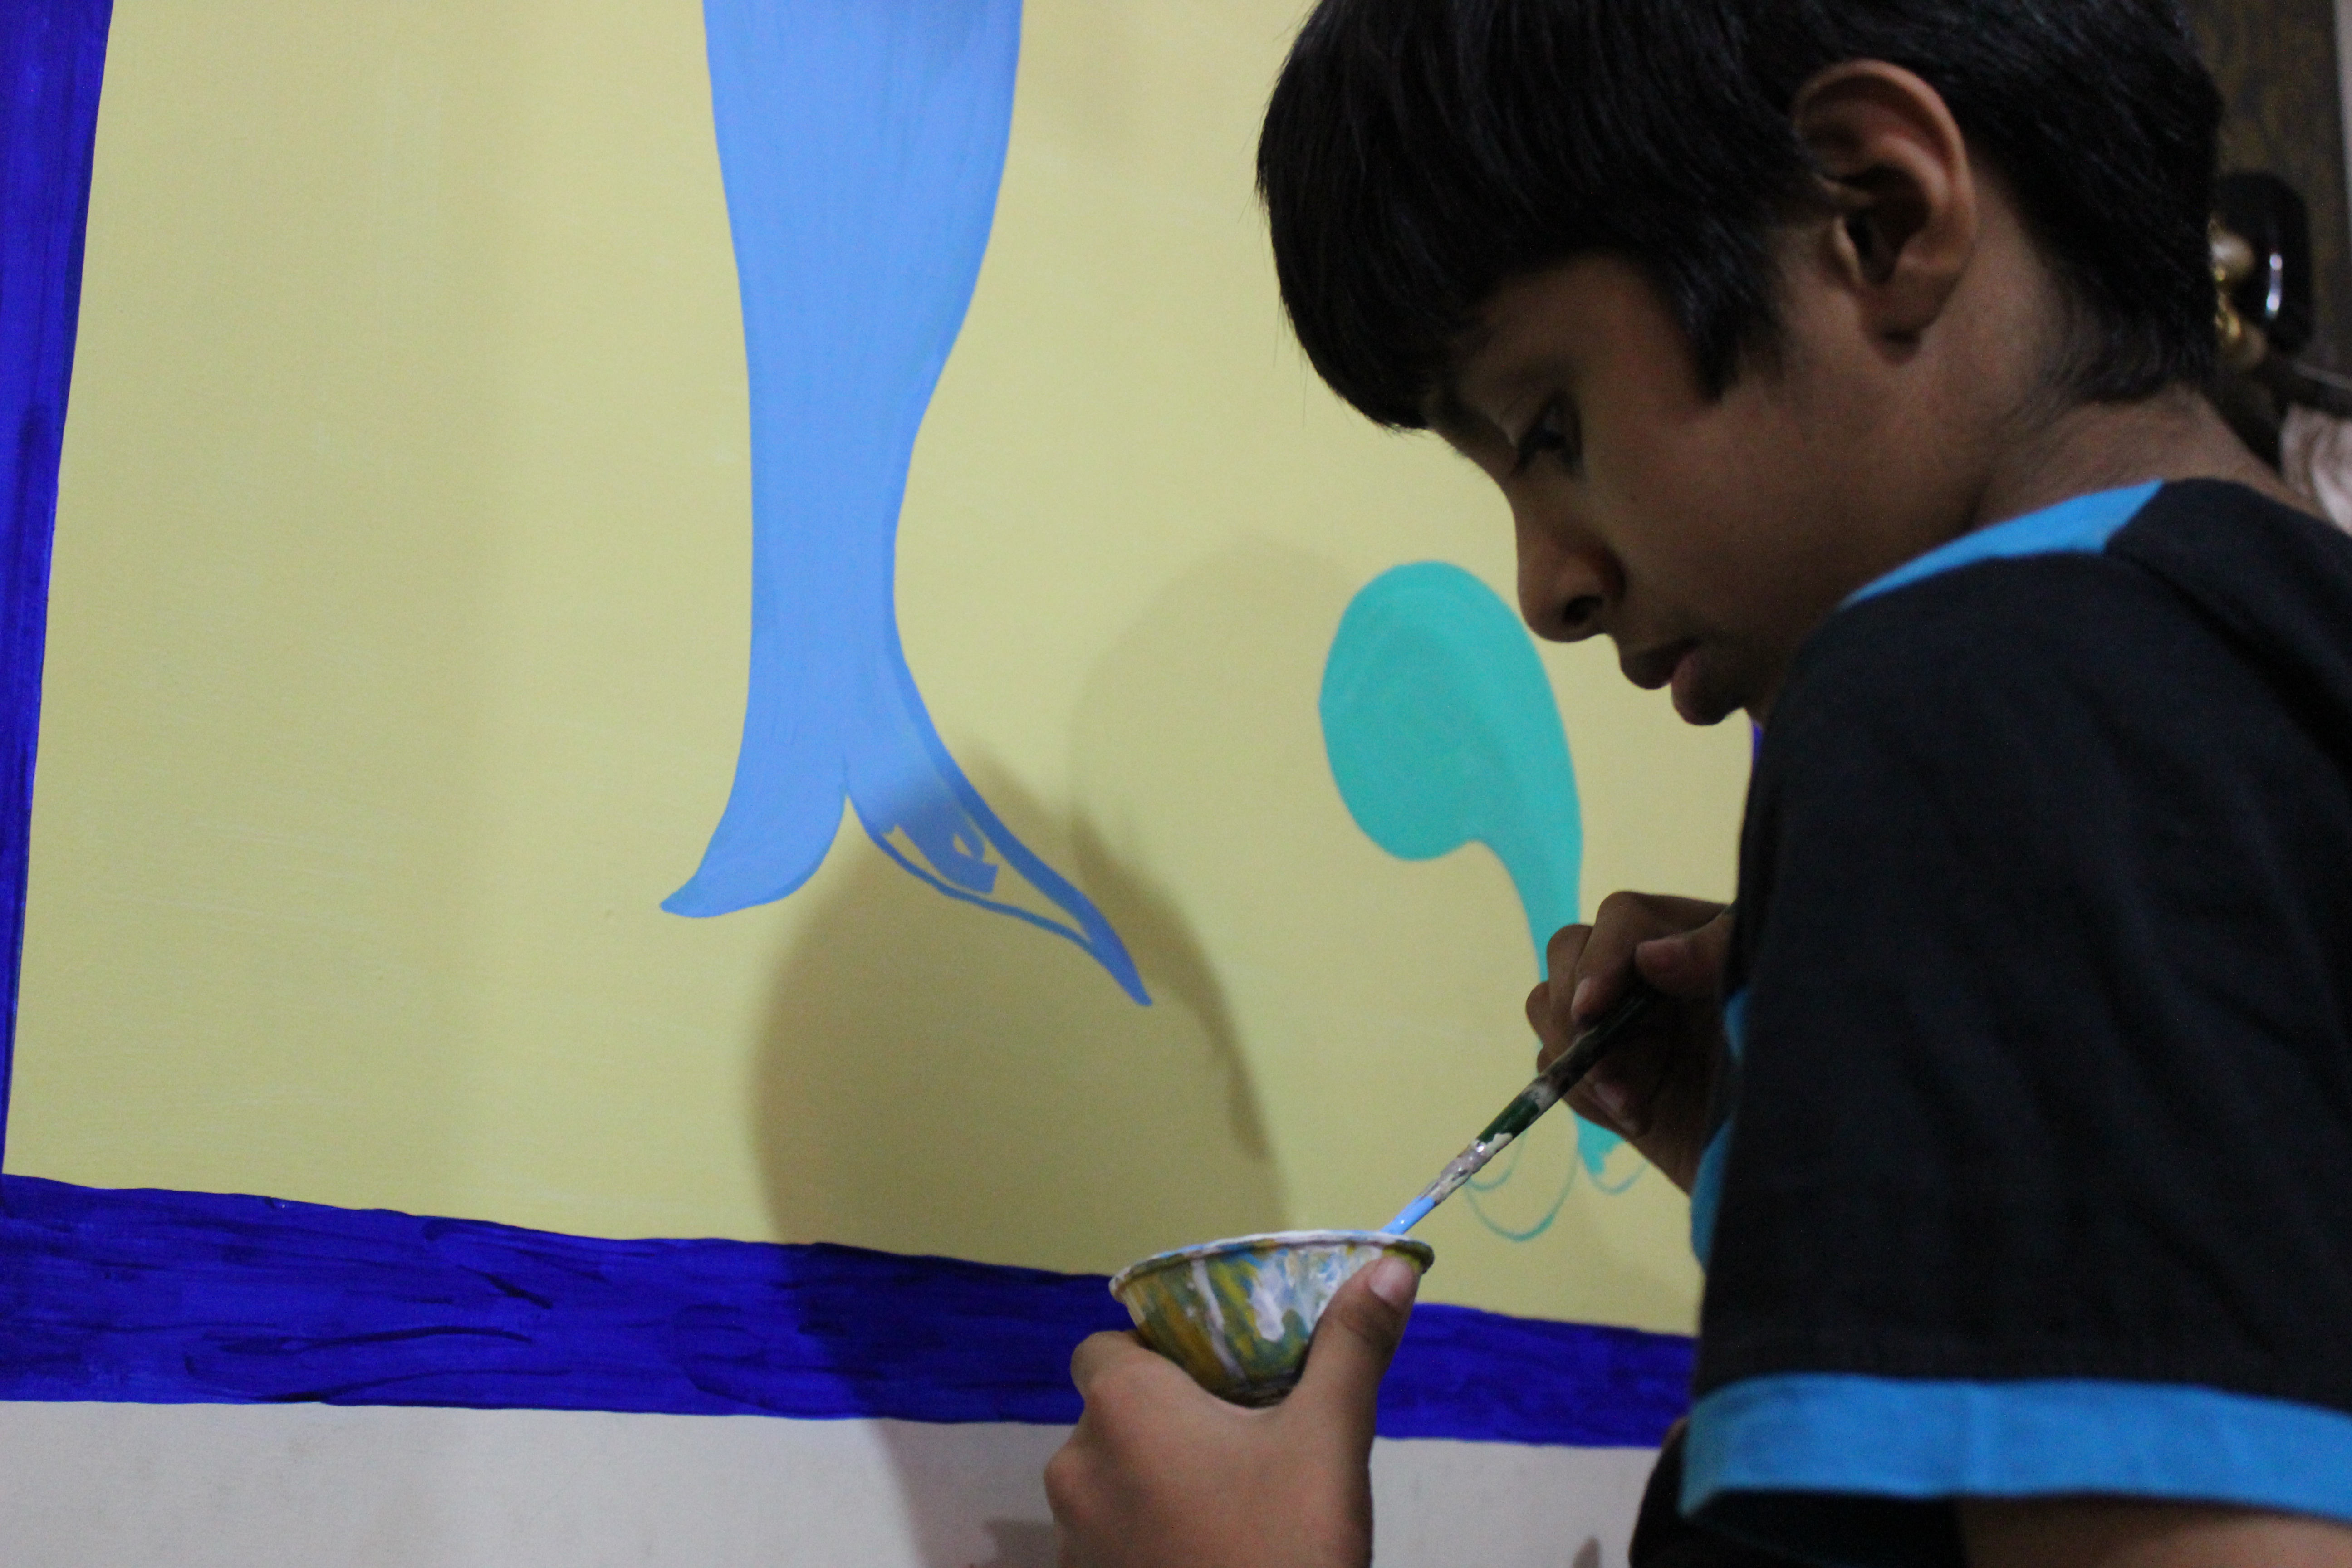 Amrit trying his hands on the painting